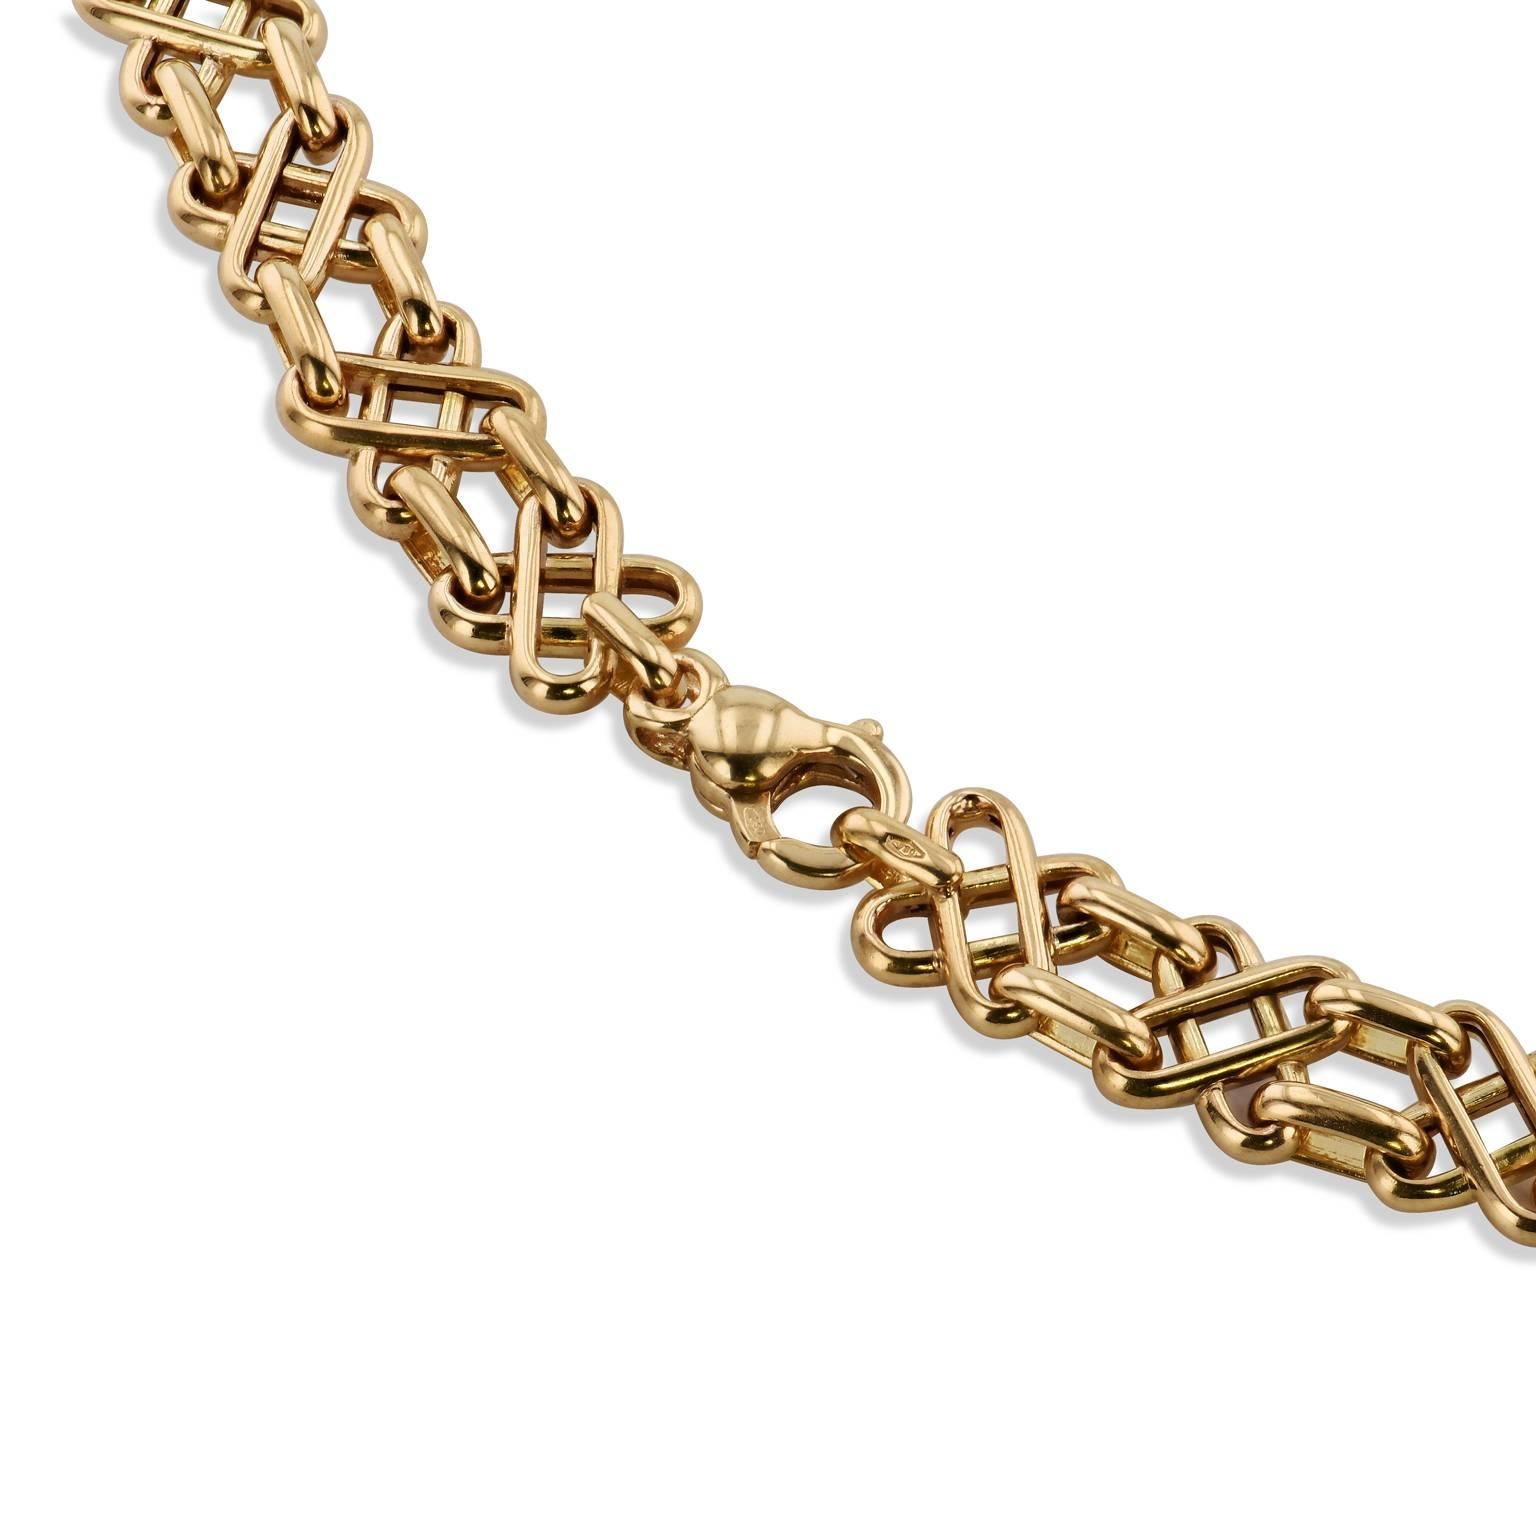  Enjoy this previously loved Tiffany & Co. 18 karat yellow gold geometric design necklace measuring 17 inches.